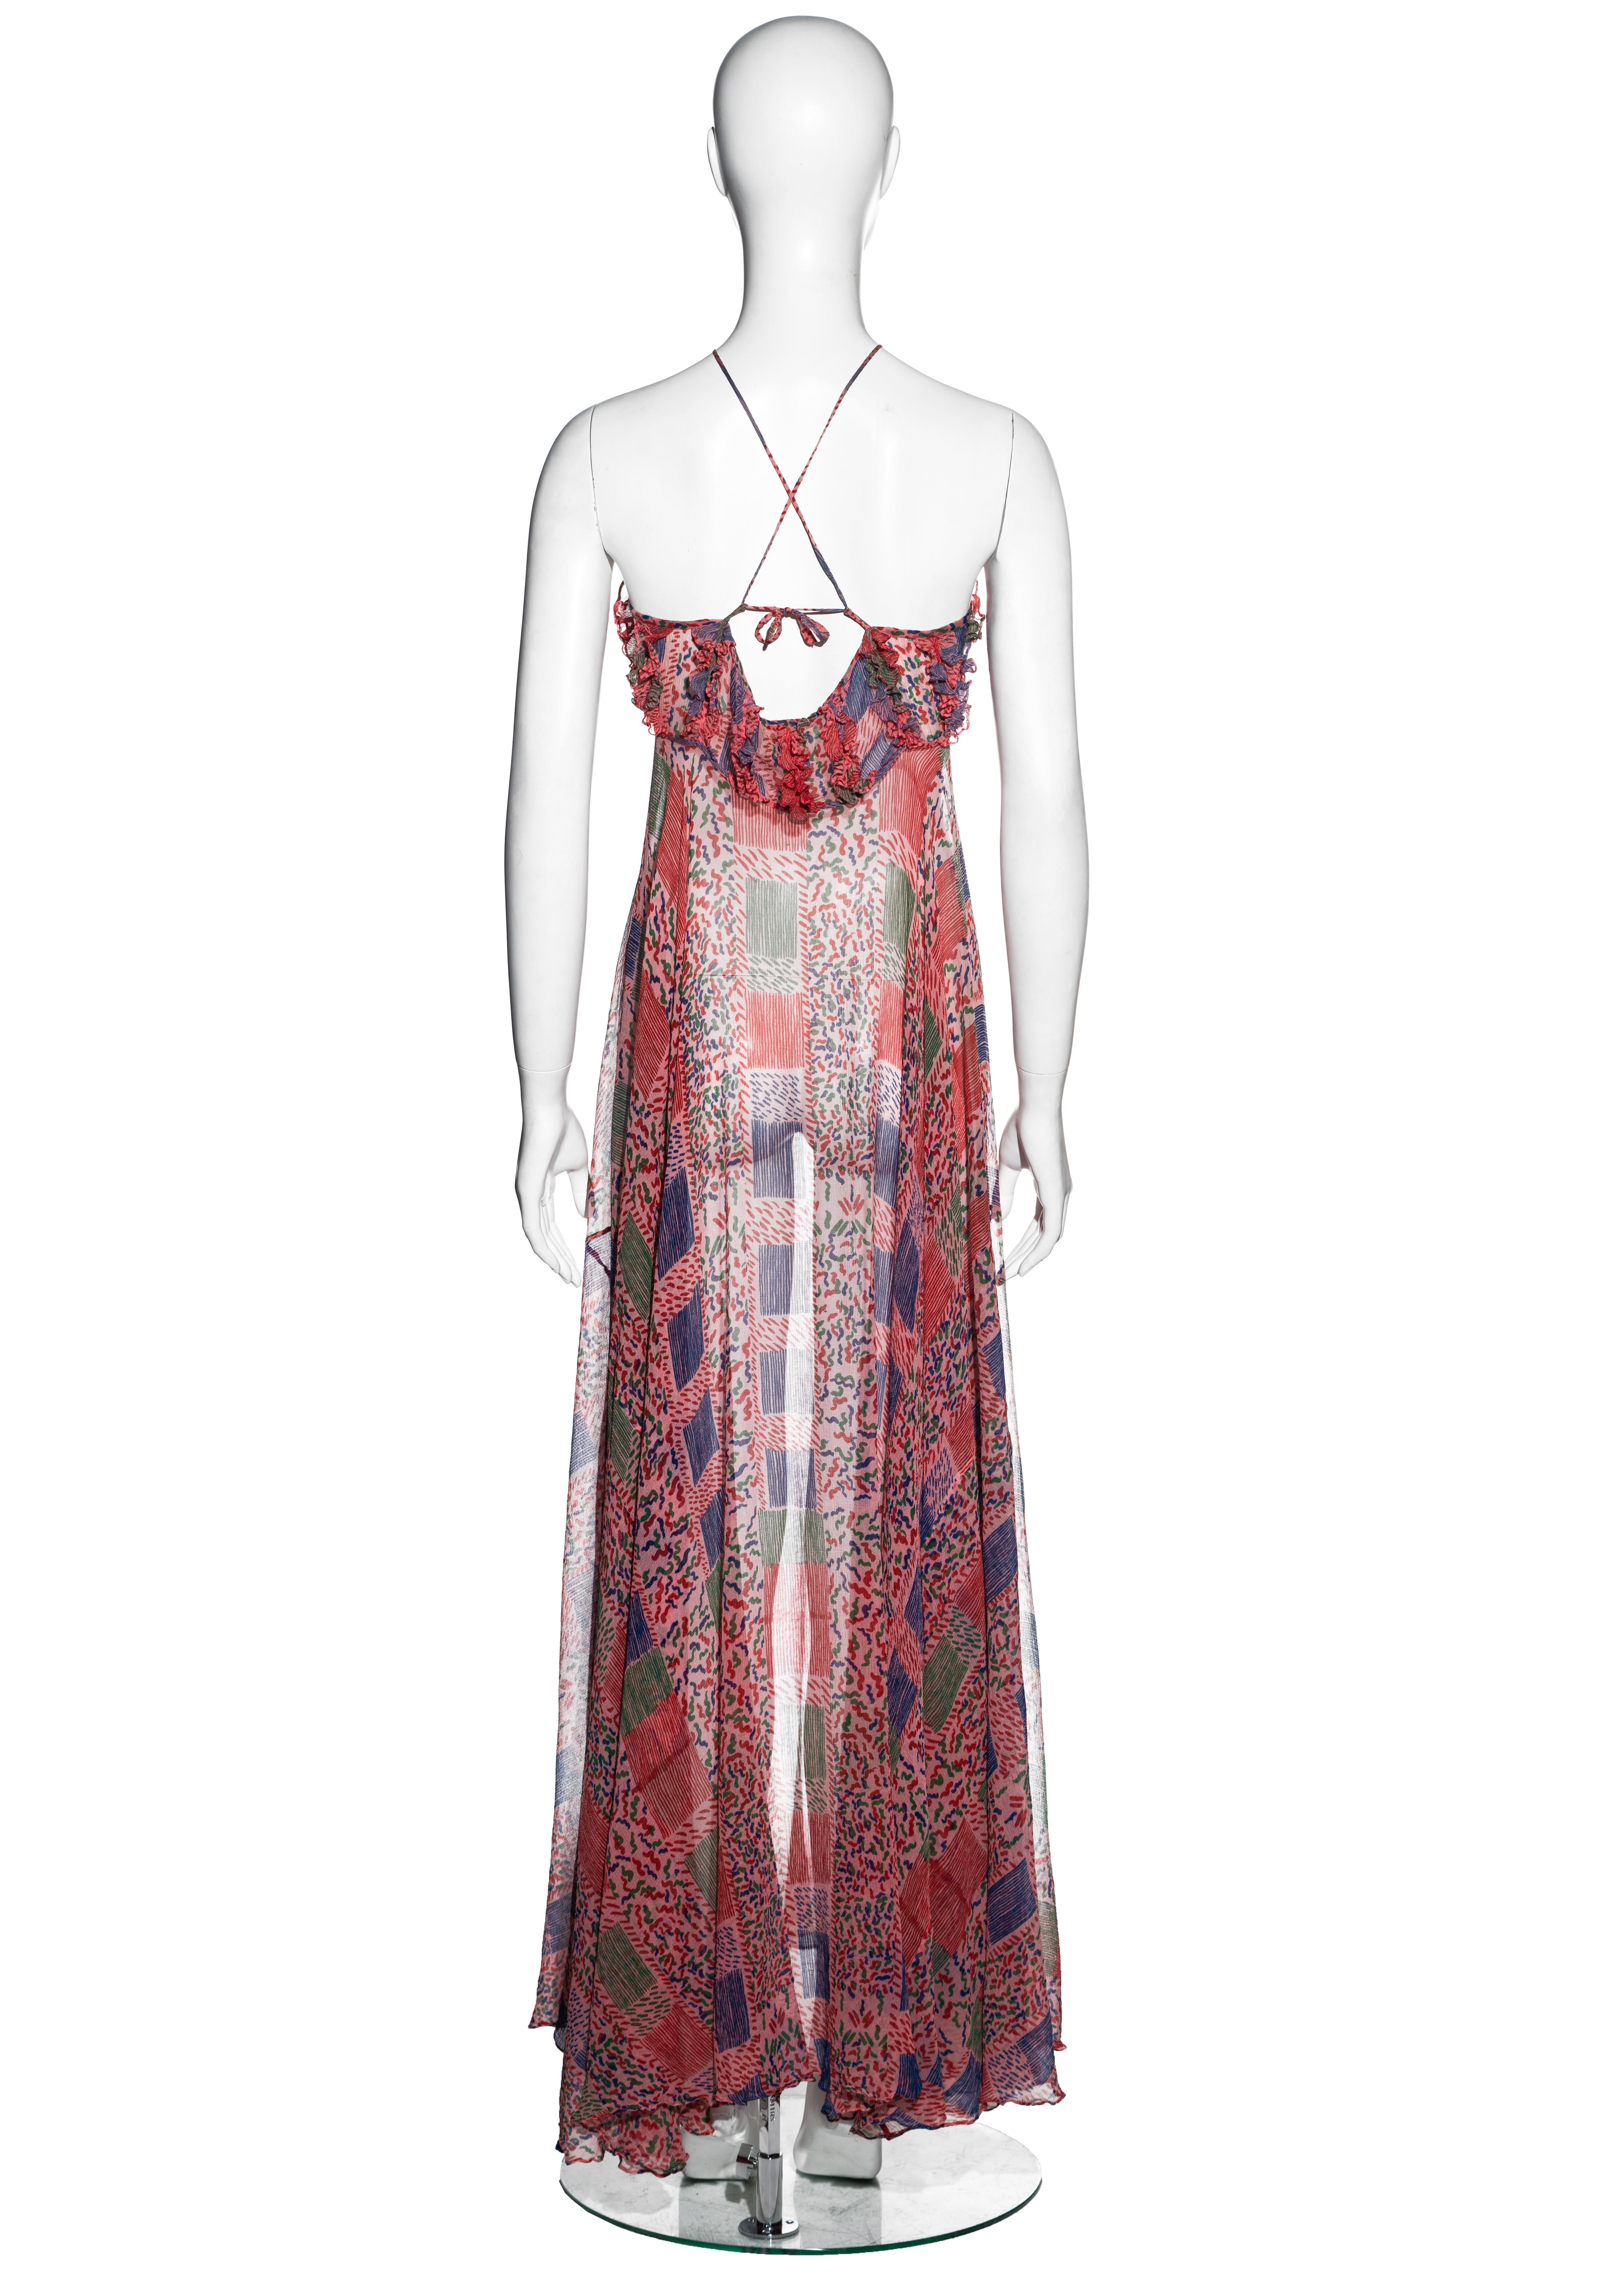 Ossie Clark pink silk chiffon maxi dress with Celia Birtwell print, ss 1976 In Excellent Condition For Sale In London, GB